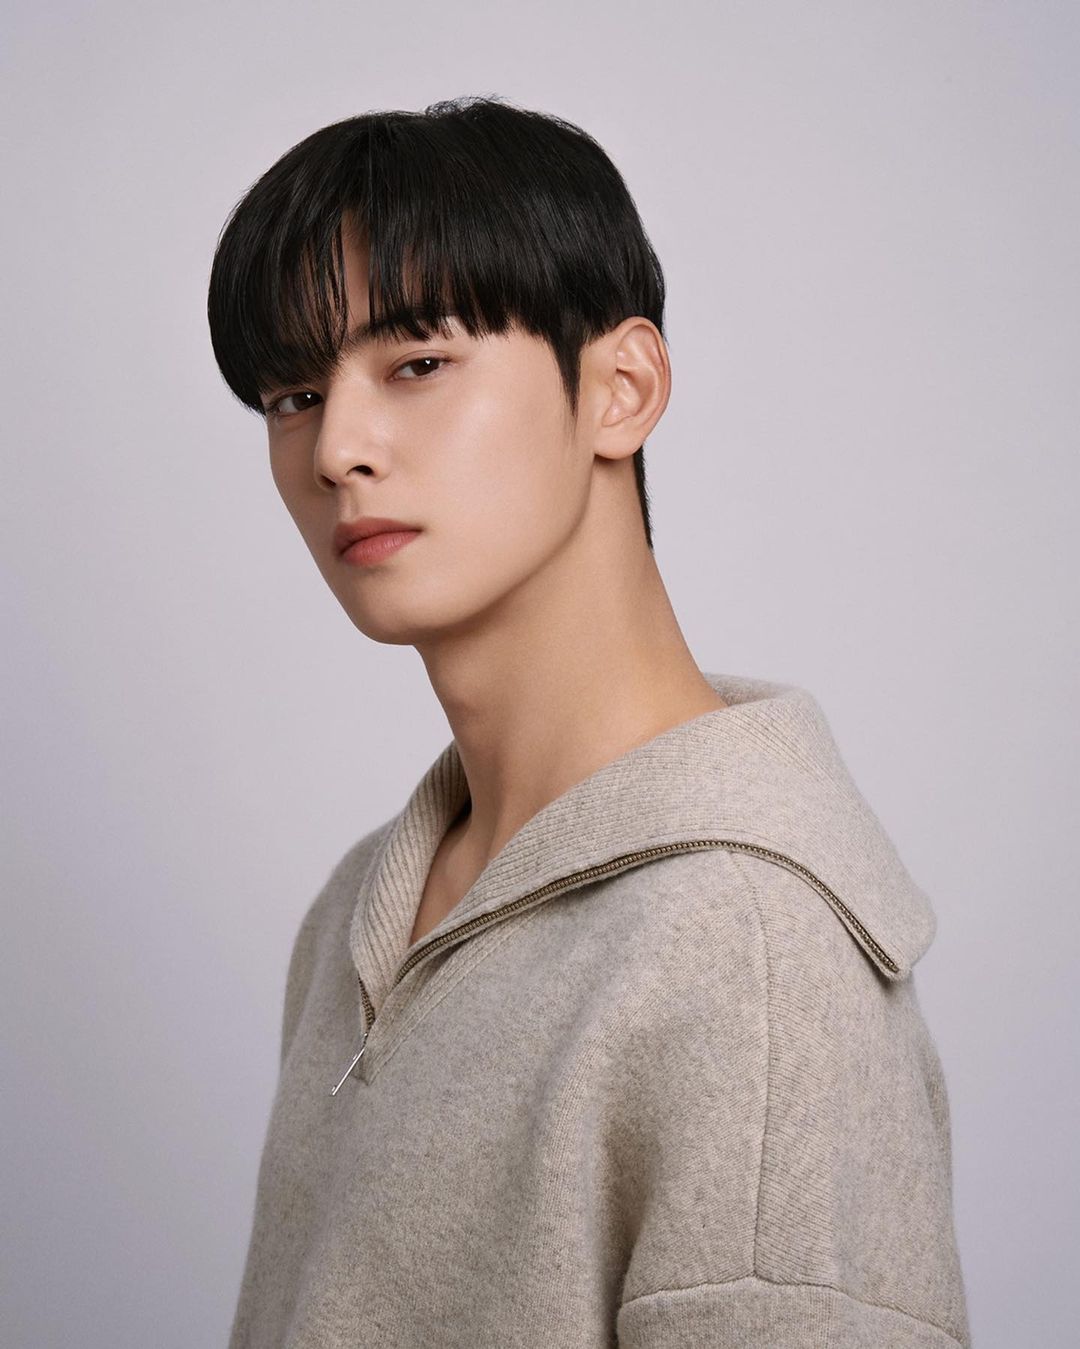 ASTRO's Cha Eun Woo Is The New Face Of Philippine Clothing Brand Penshoppe